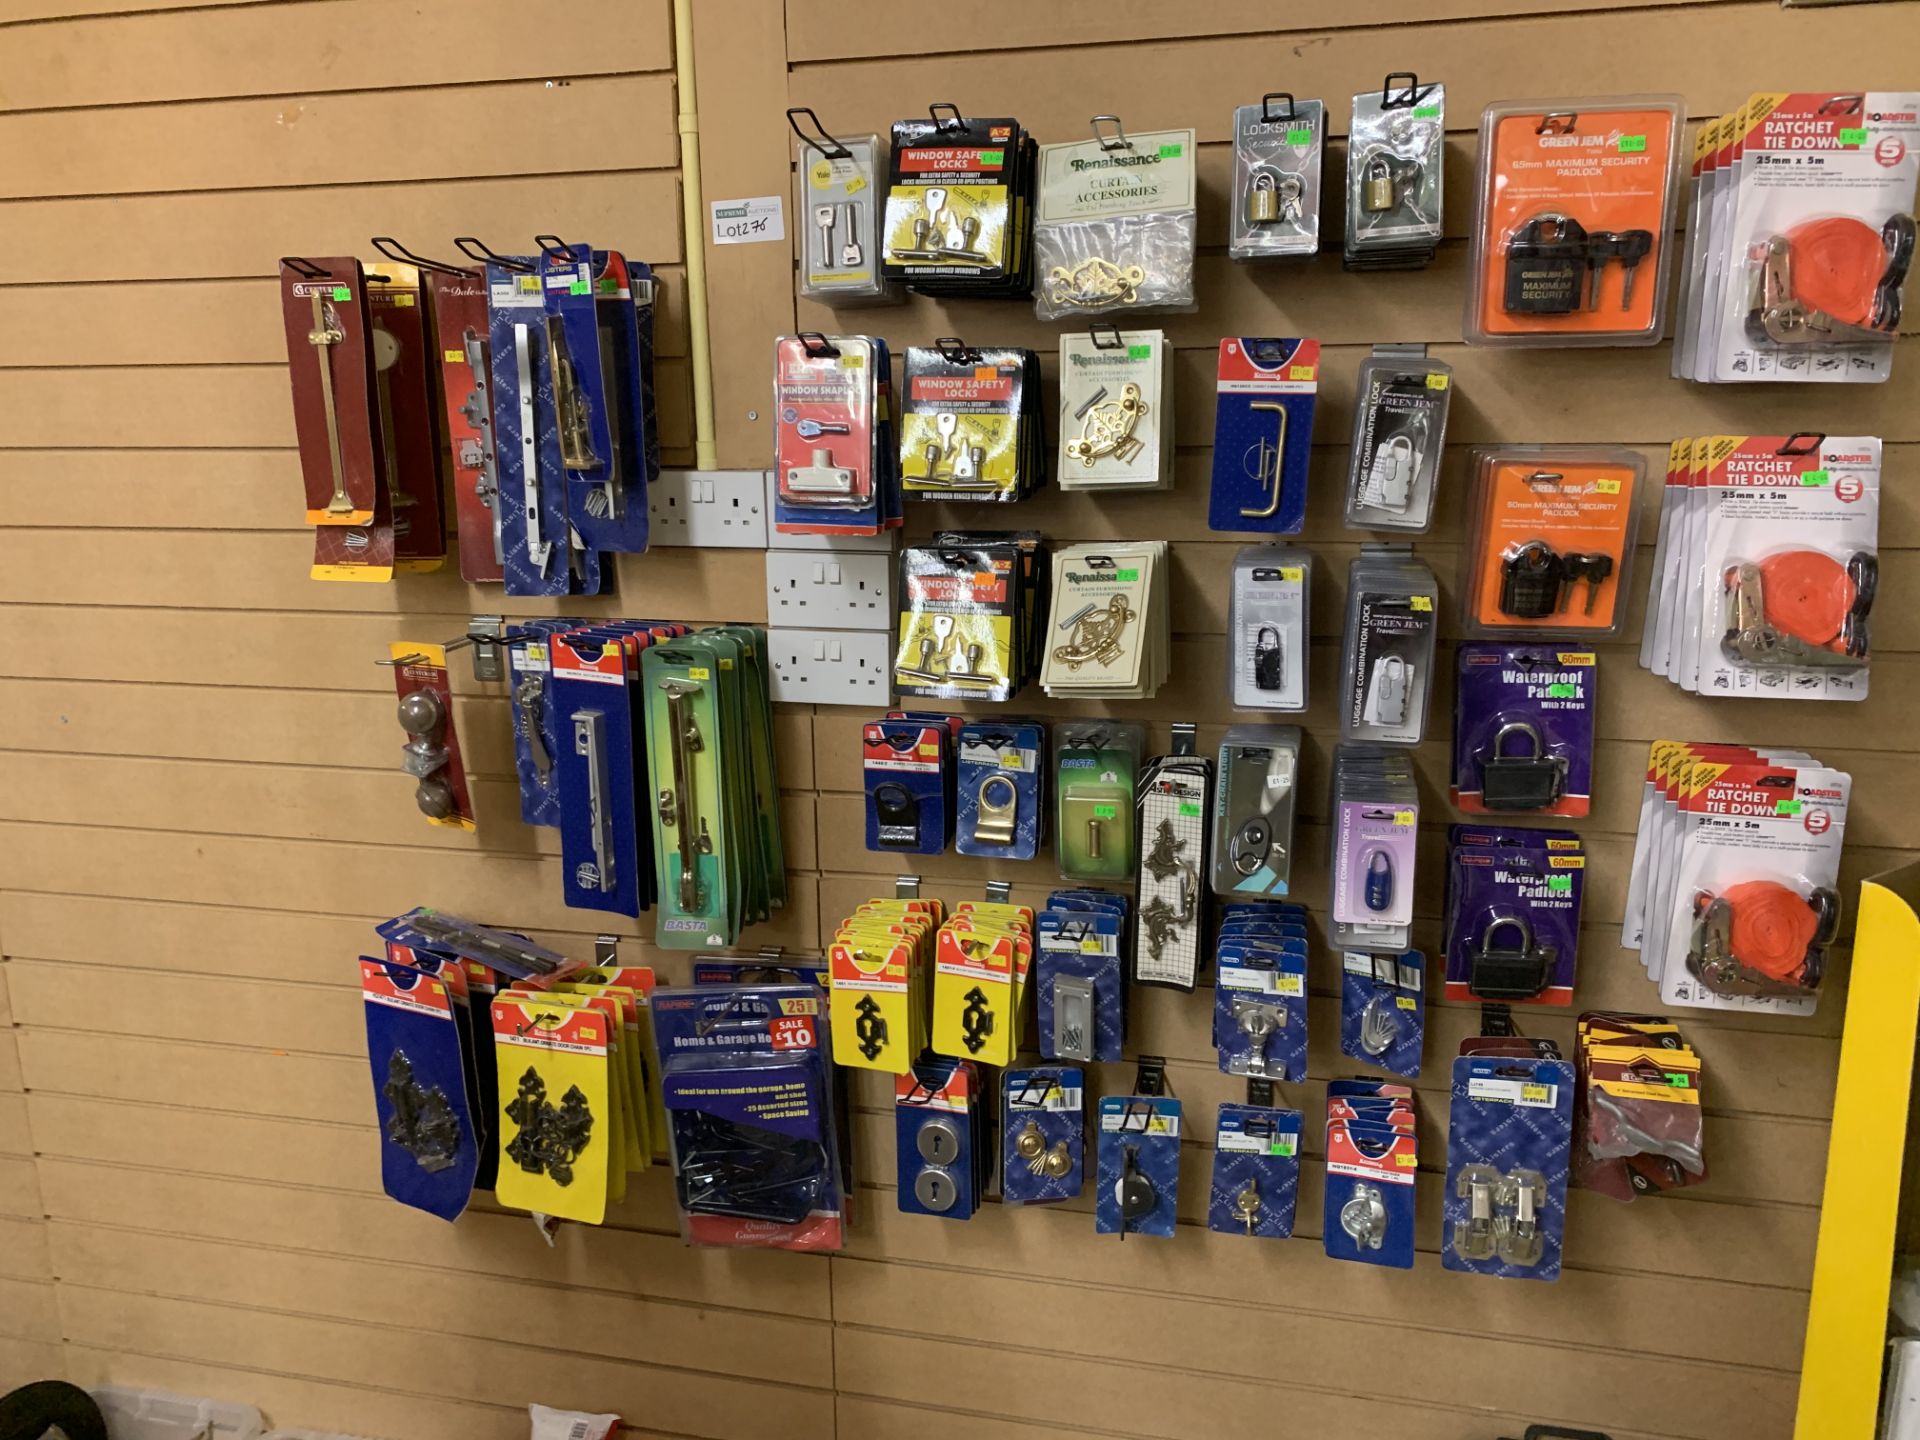 DISPLAY WALL OF LARGE QUANTITY OF DIY PRODUCTS INCLUDING MAXIMUM SECURITY PADLOCKS, WATERPROOF